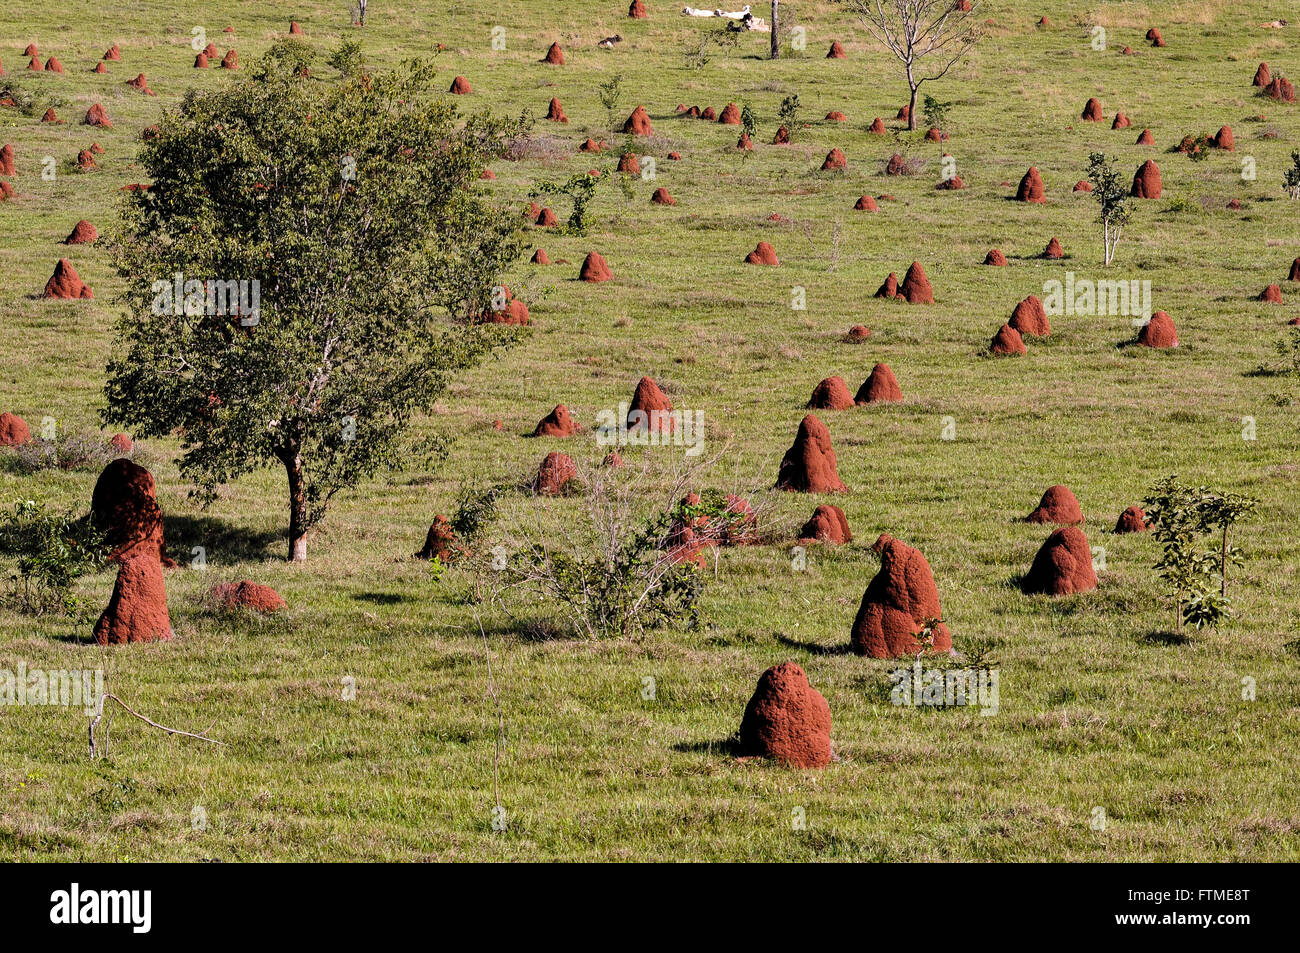 Termite mounds in pasture in rural Stock Photo